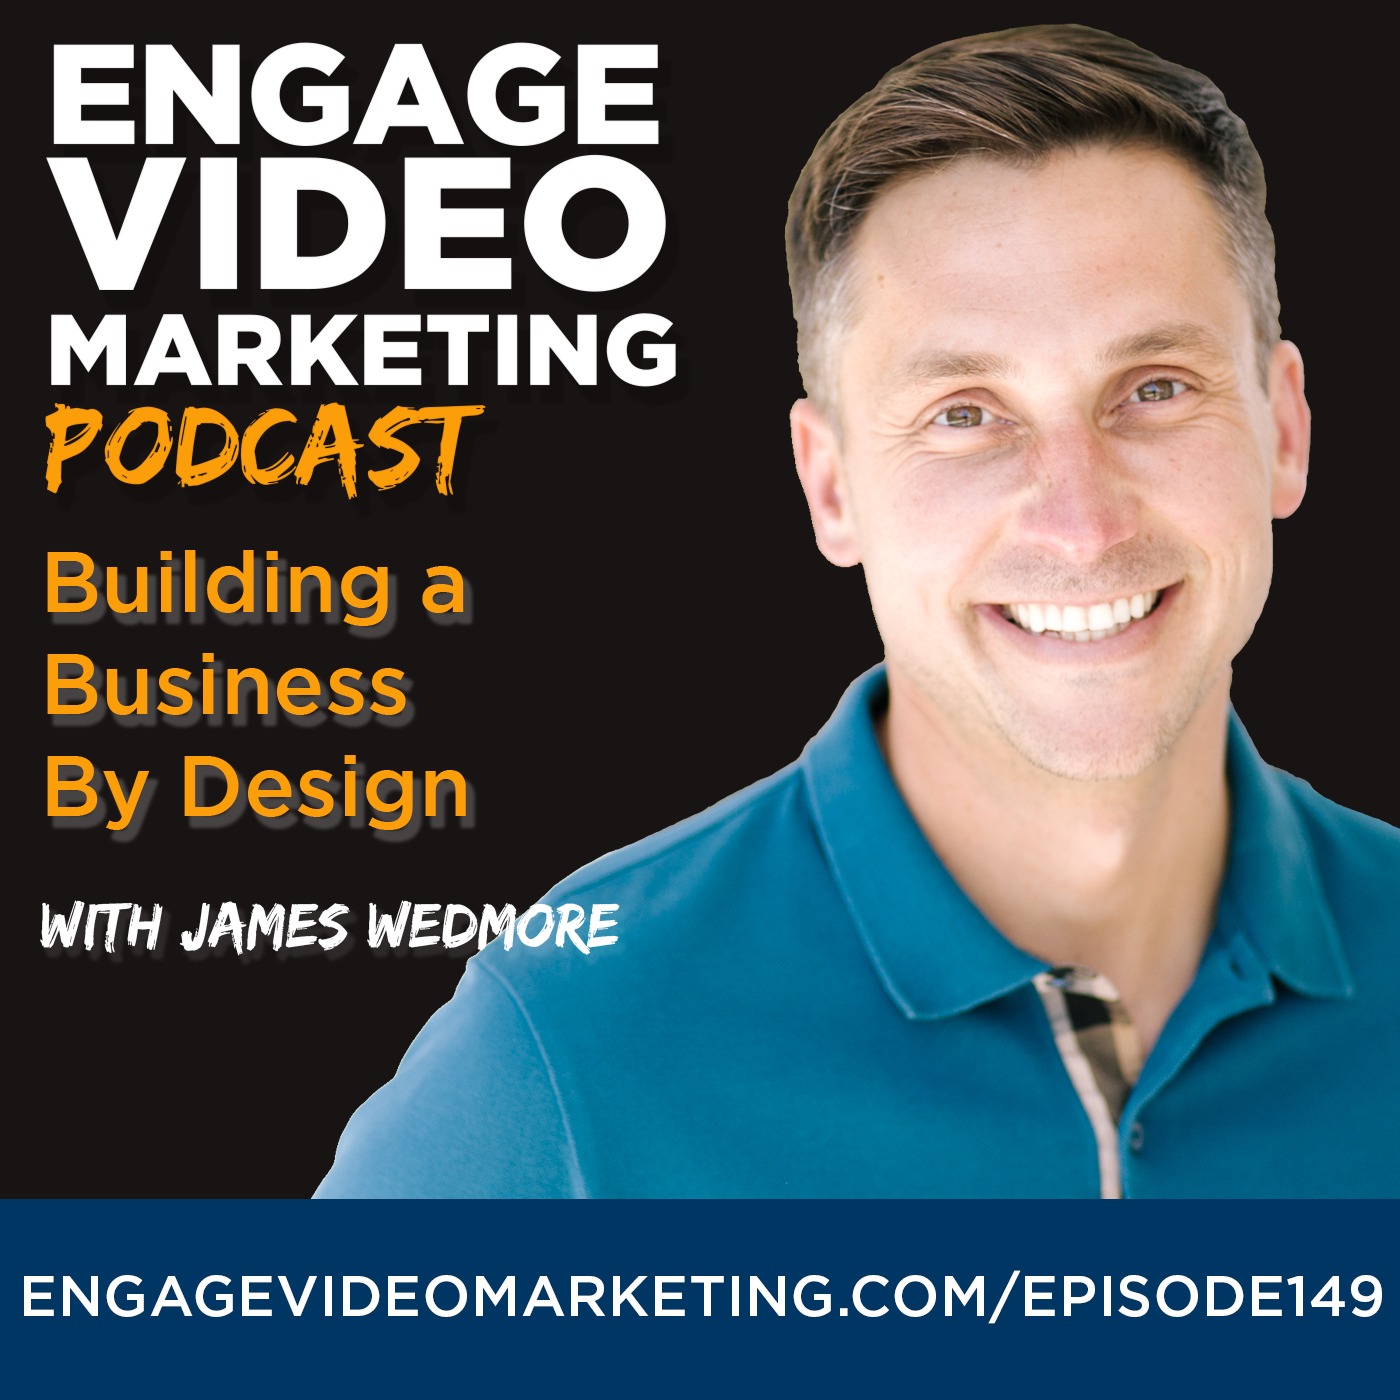 Building a Business By Design with James Wedmore